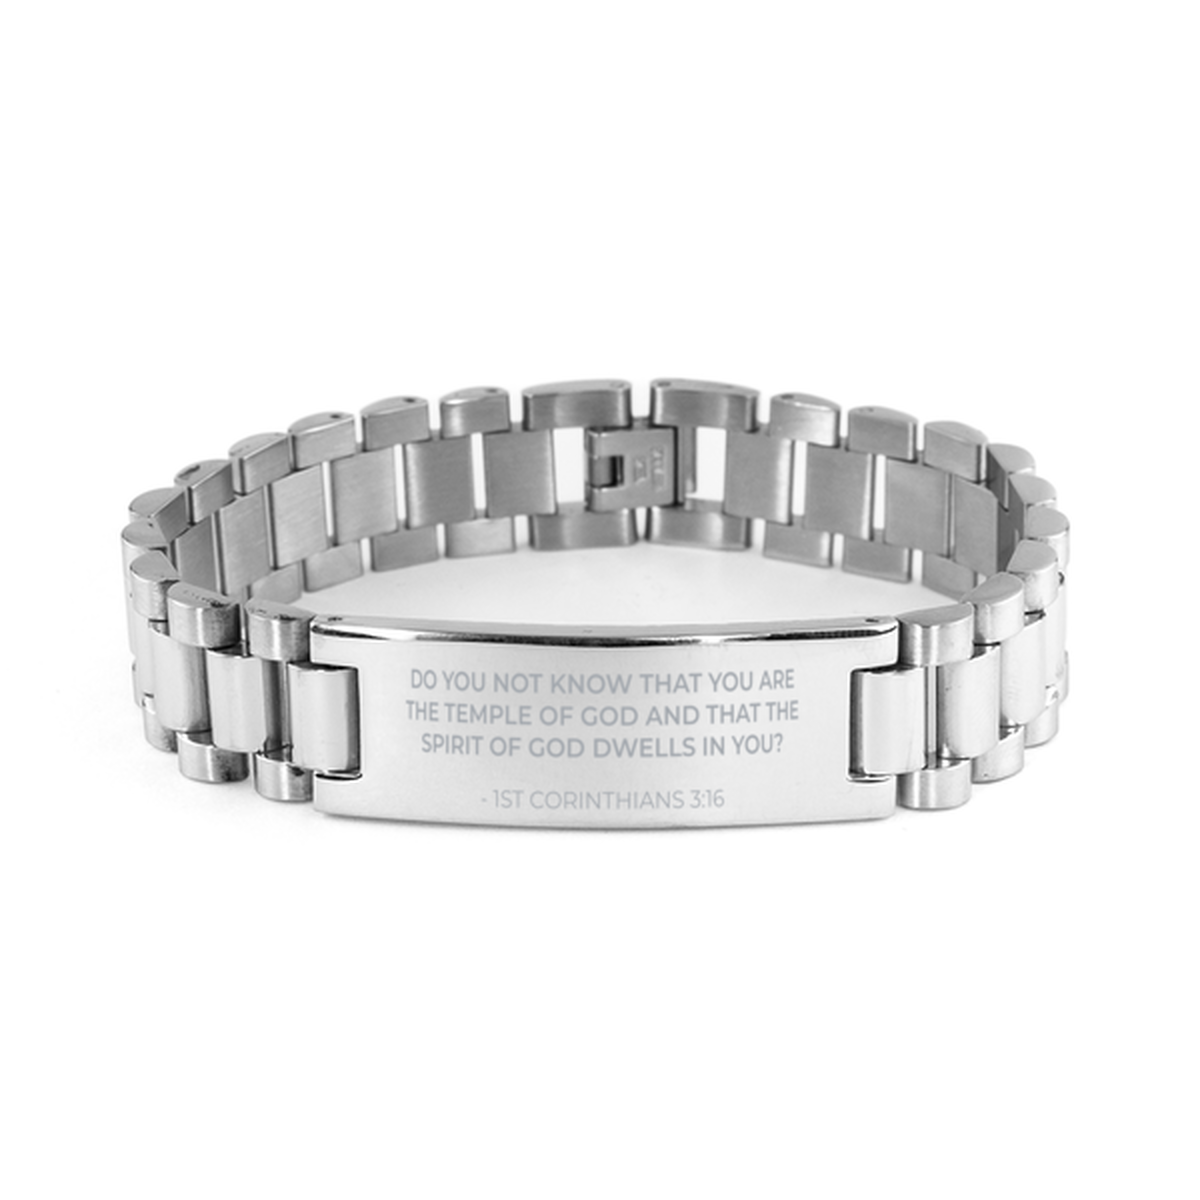 Christian Ladder Stainless Steel Bracelet, 1St Corinthians 3:16 Do You Not Know That You Are The Temple Of God, Motivational Bible Verse Gifts For Men Women